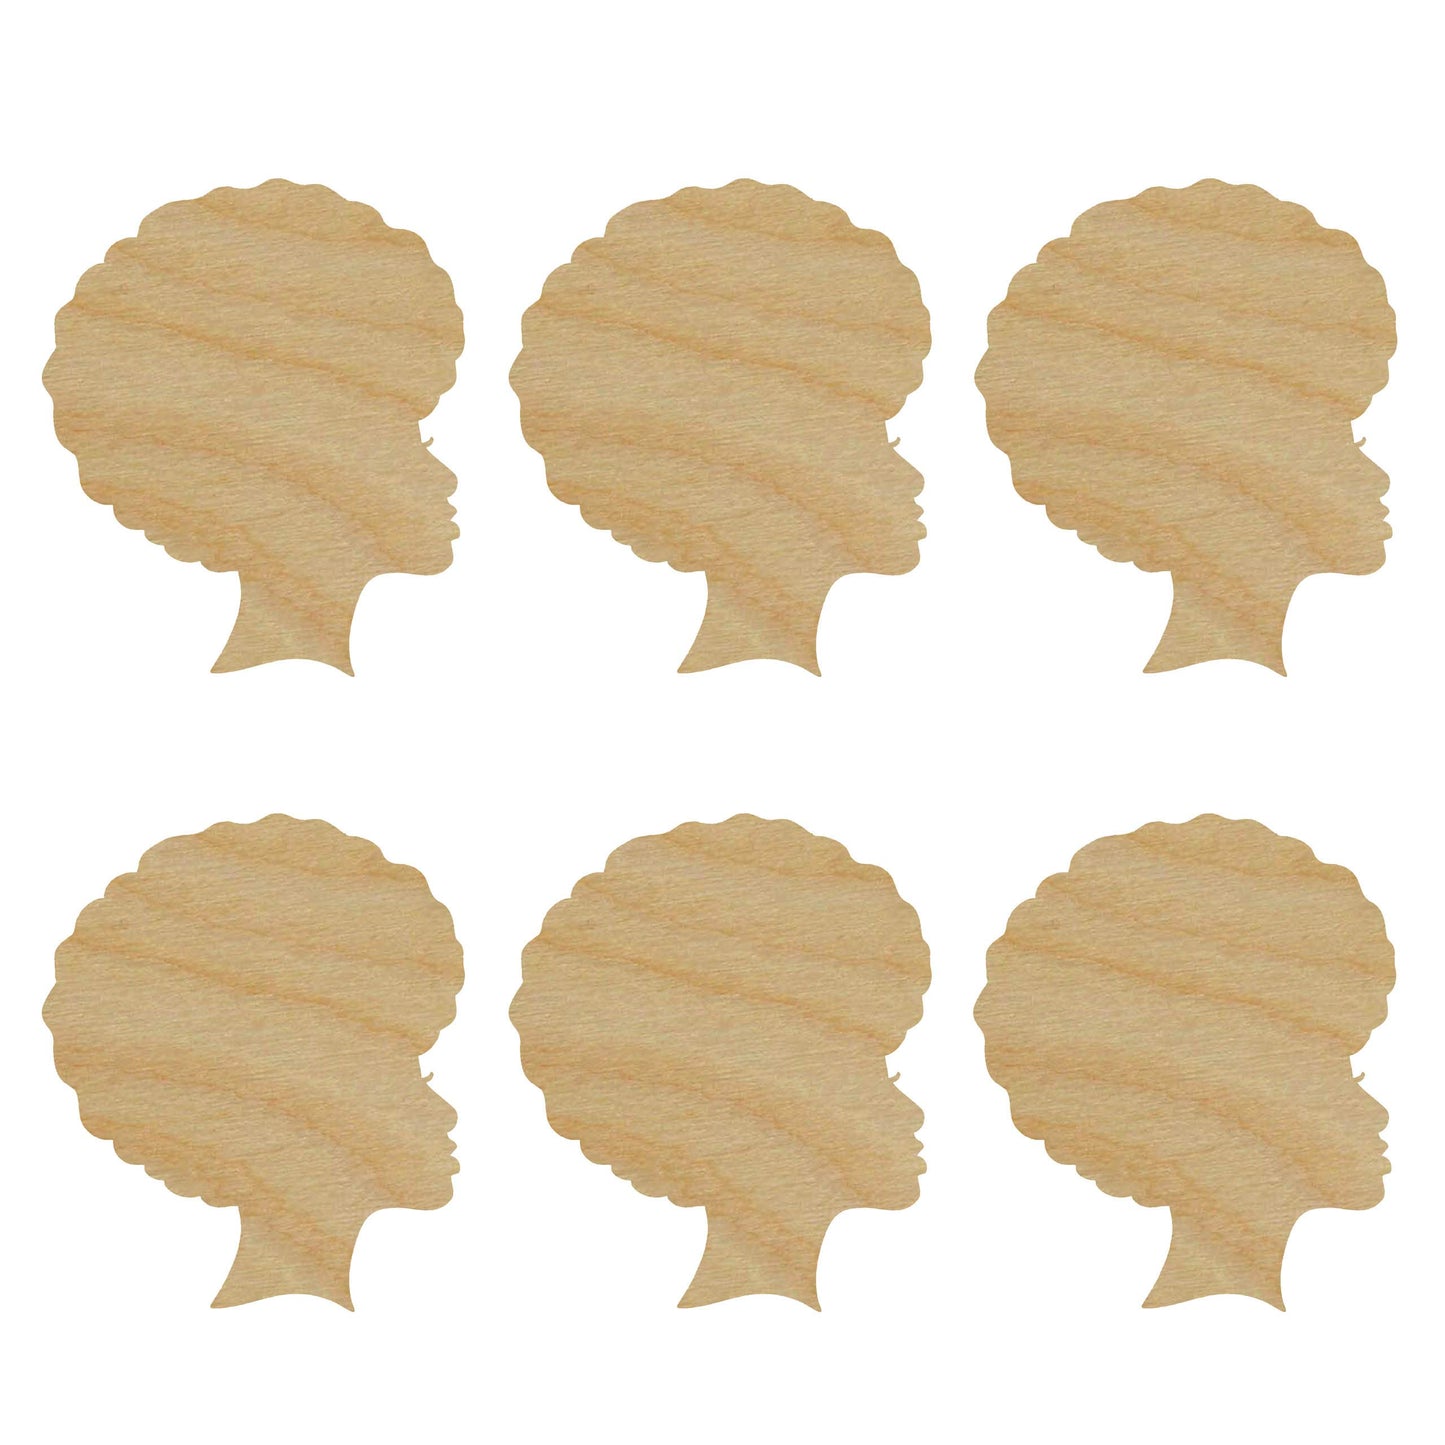 Artistic Craft Supply Afro Woman Shape Unfinished Wood Animal Cut Outs 3 inch Inch 6 Pieces Afro01-03-06